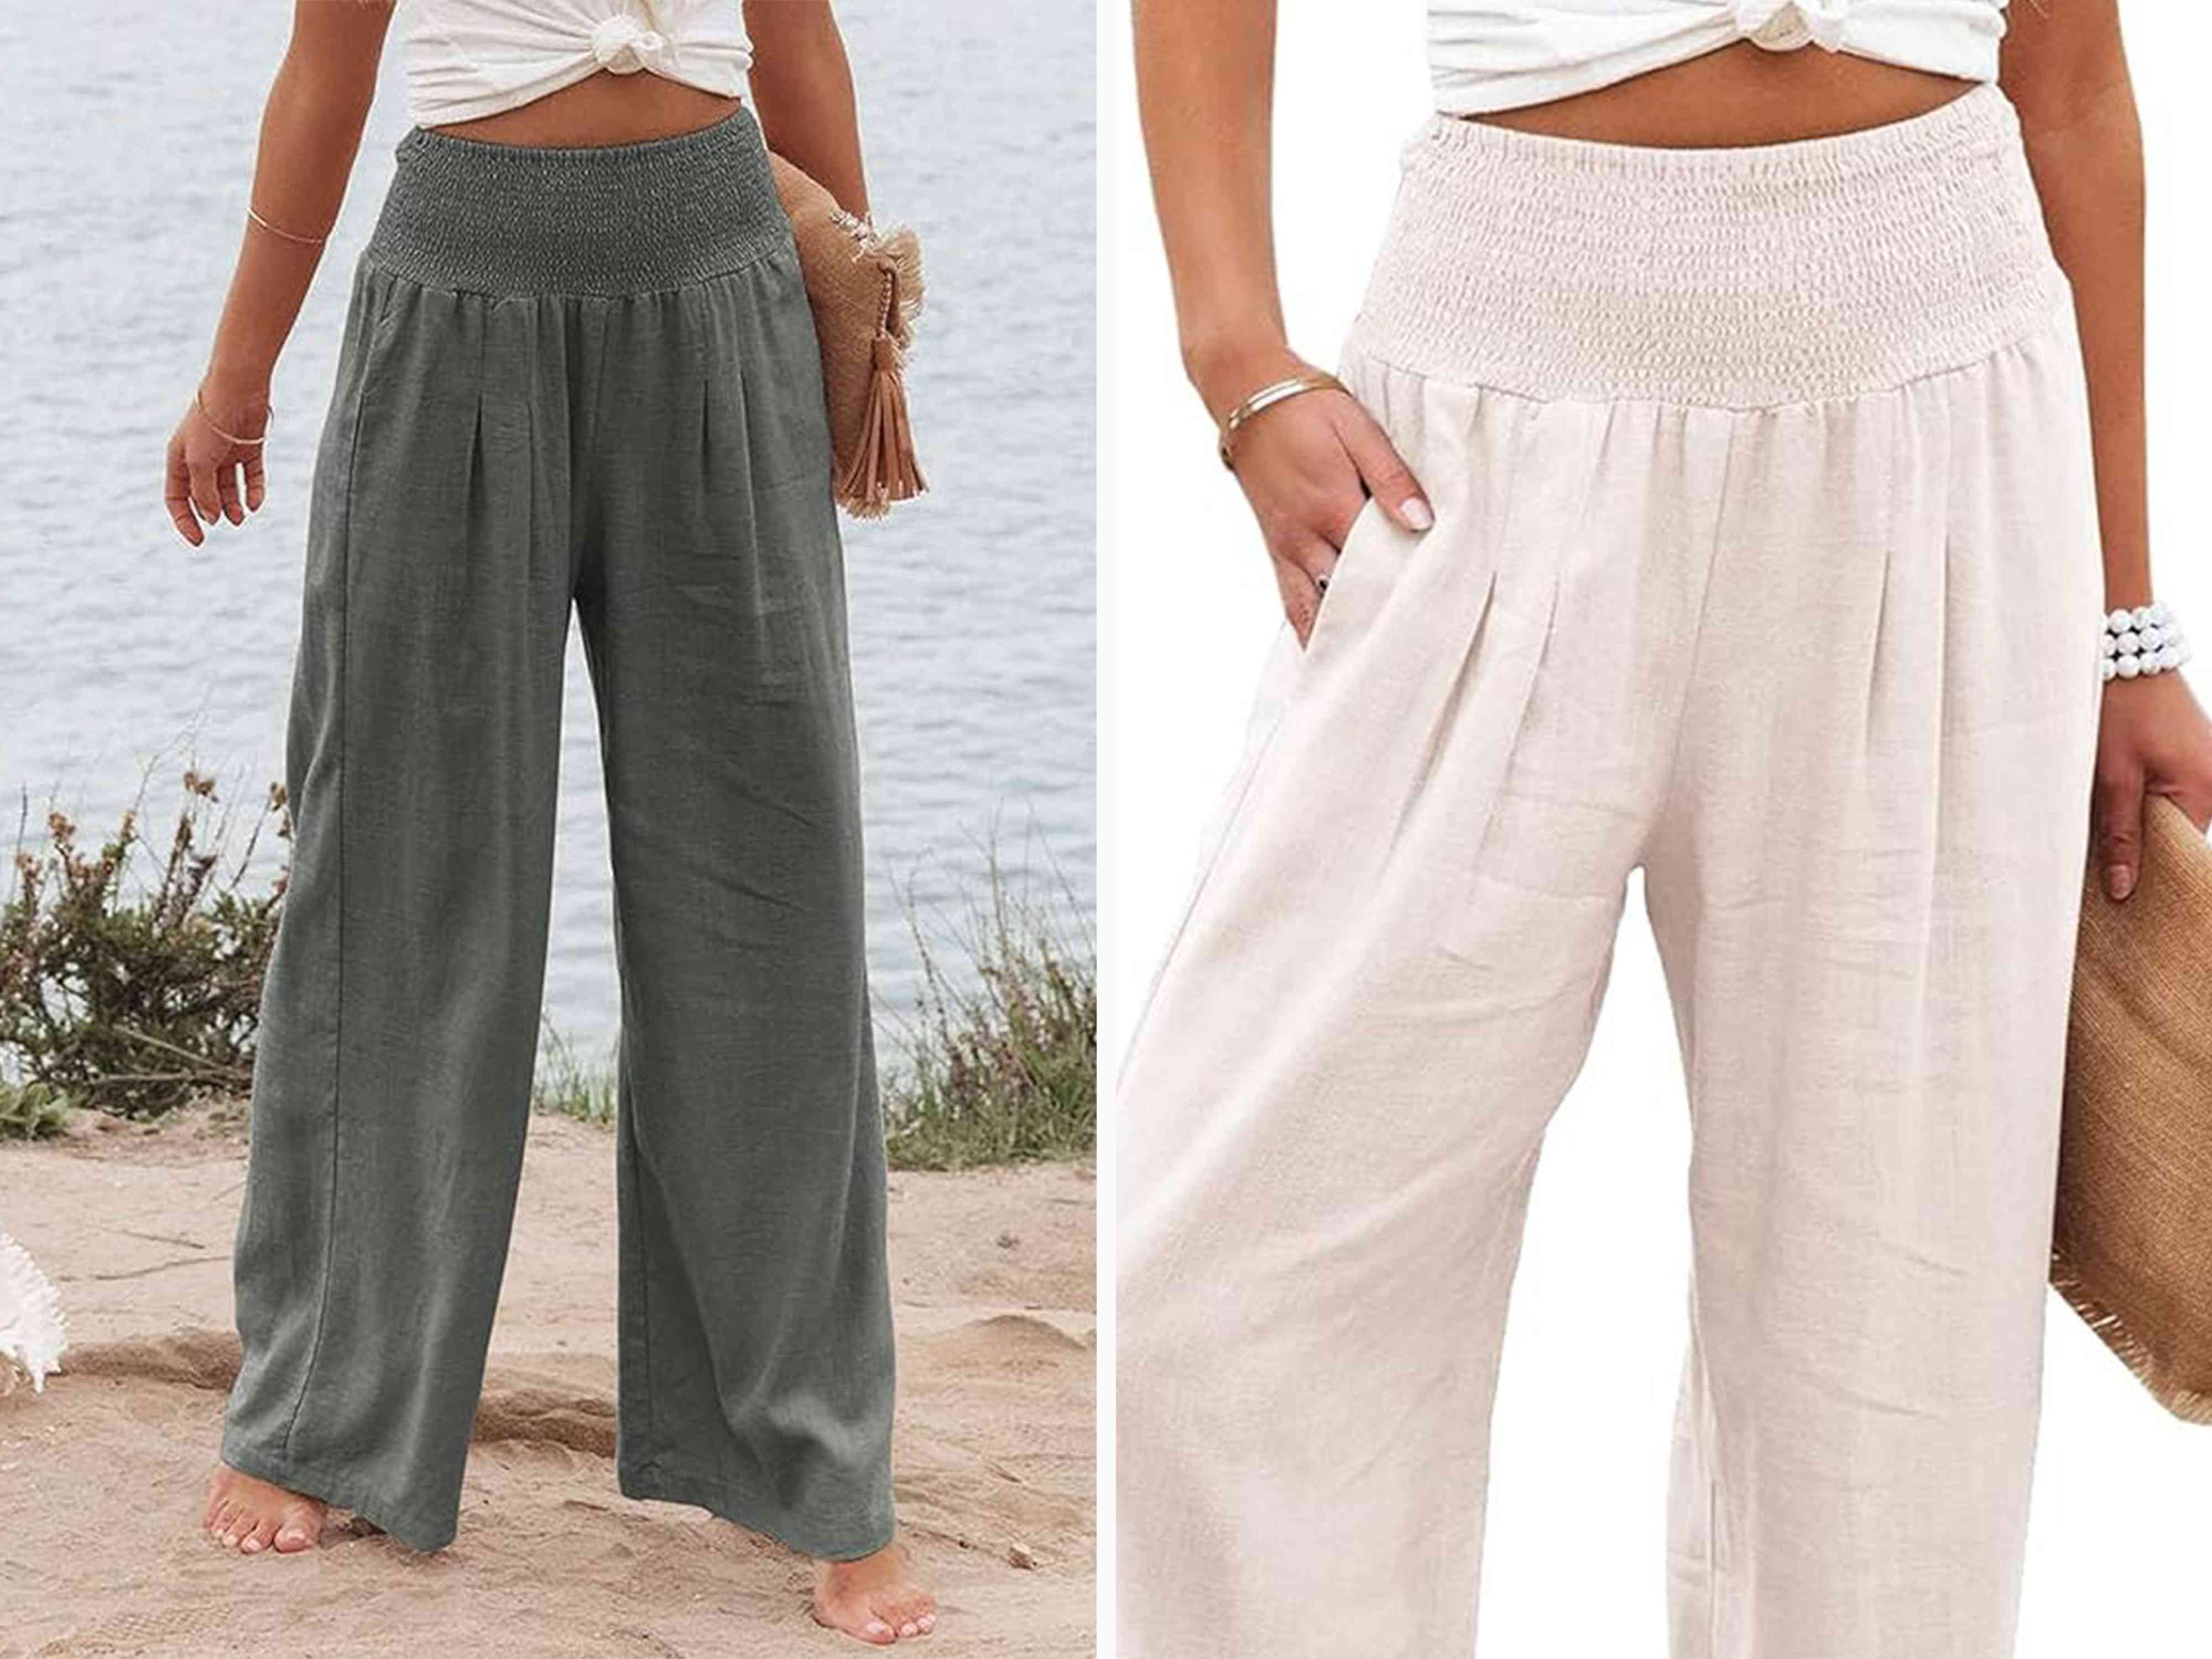 Shoppers Are Obsessed With This Breezy $29 Jeans-Alternative That Feels Like Pajamas